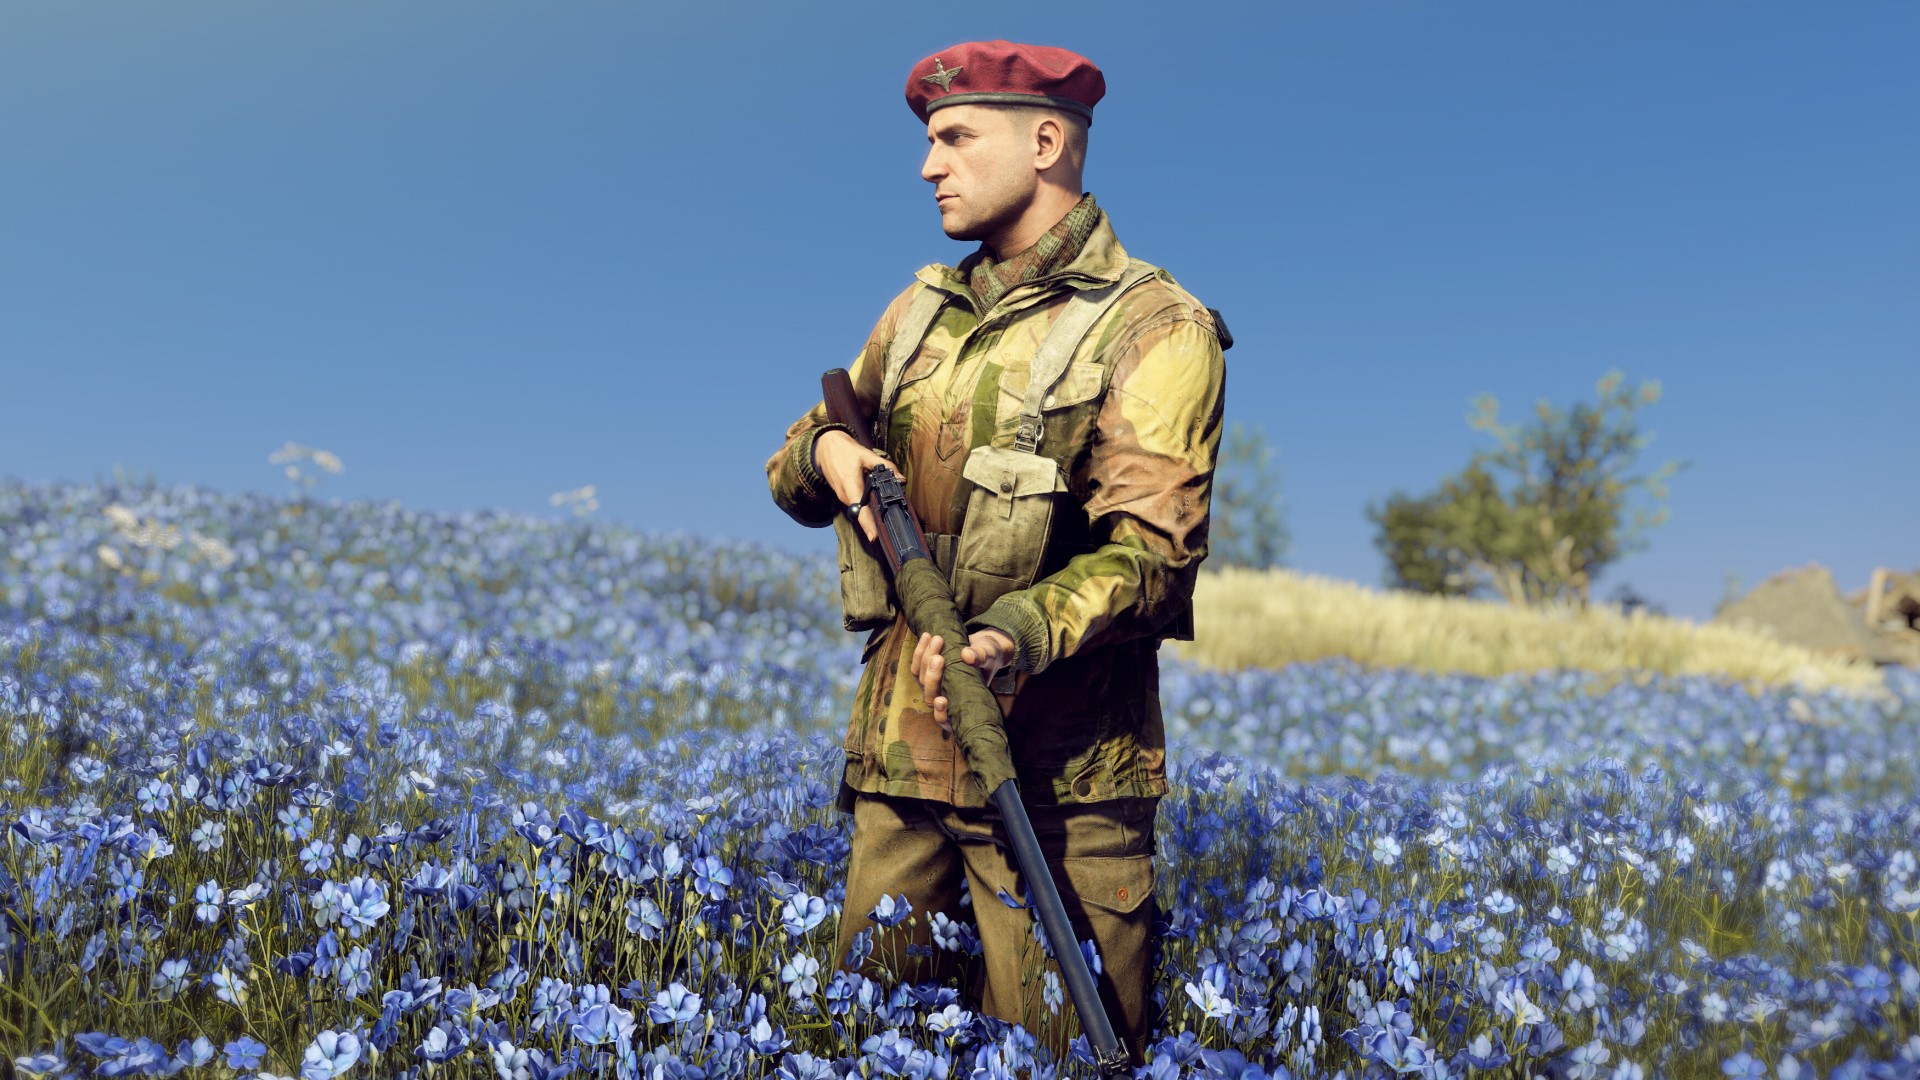 Sniper Elite 5 free DLC pack adds a dose of the British airborne